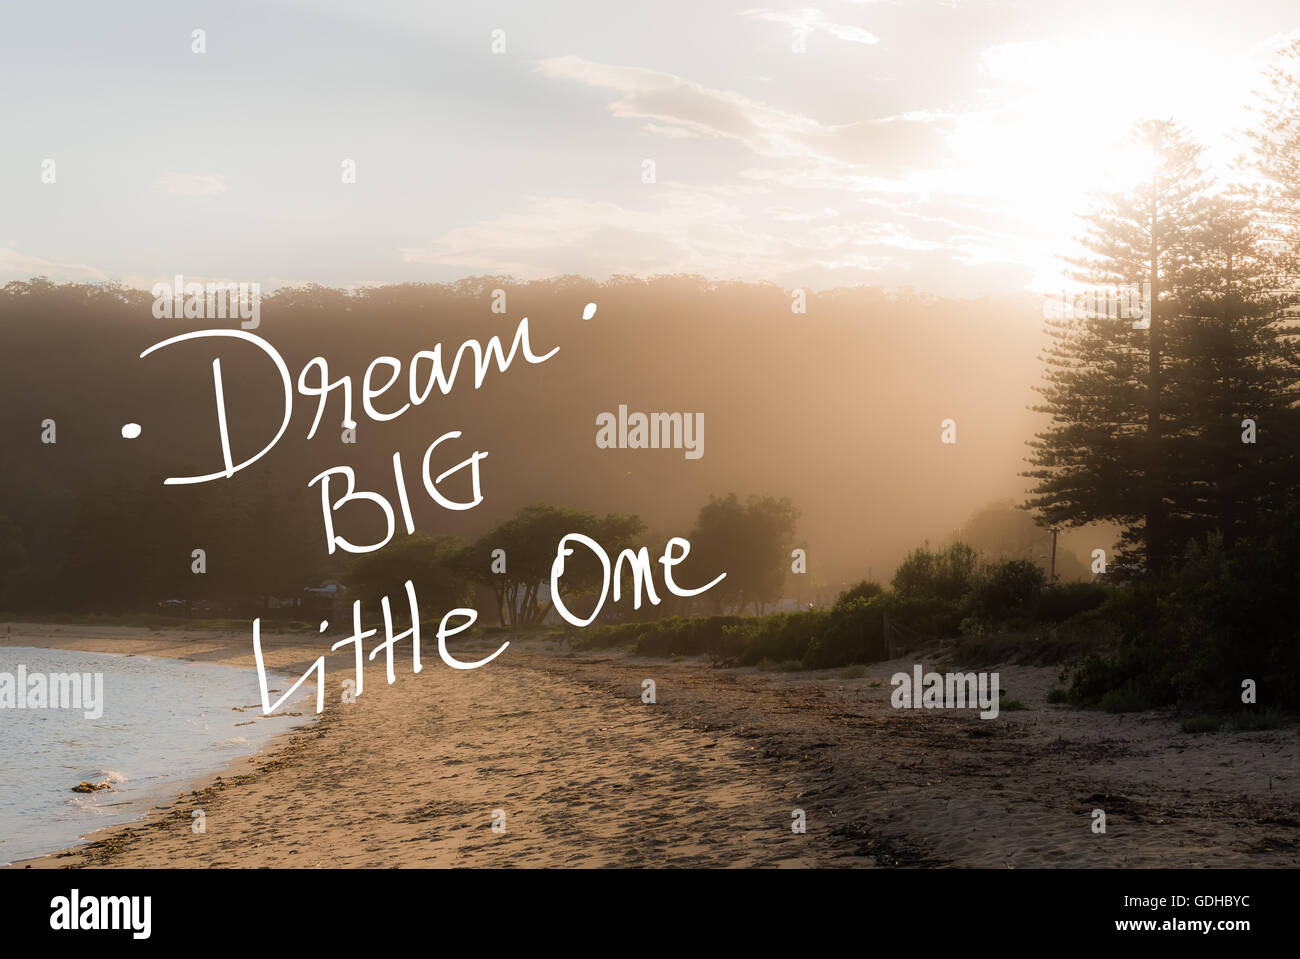 Dream Big Little One message. Handwritten motivational text over sunset calm sunny beach background with vintage filter applied Stock Photo